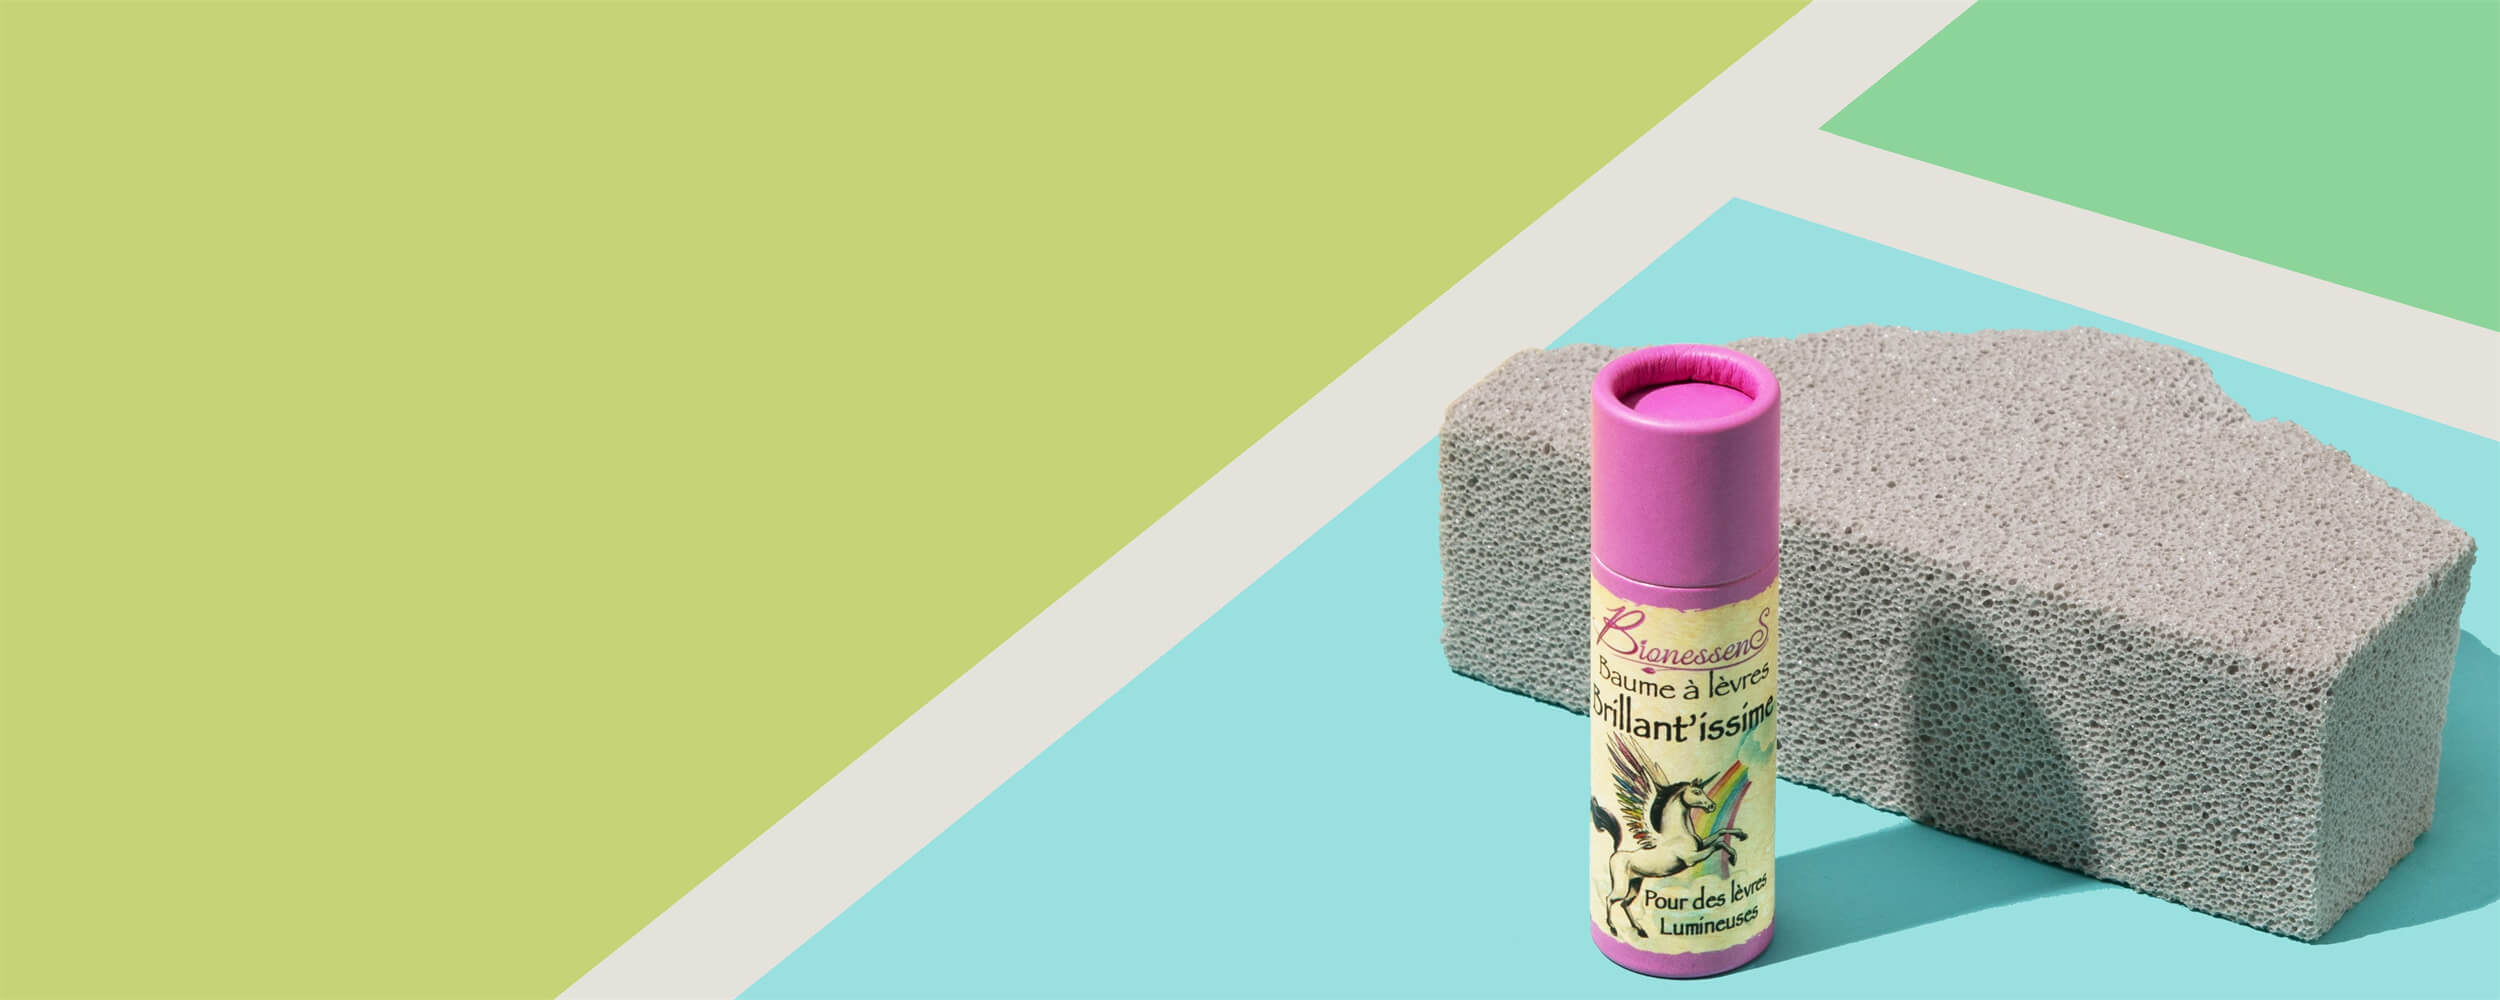 A colorful paper tube with a vibrant pink cap rests beside a textured gray stone on a split background of mint green and pastel blue.